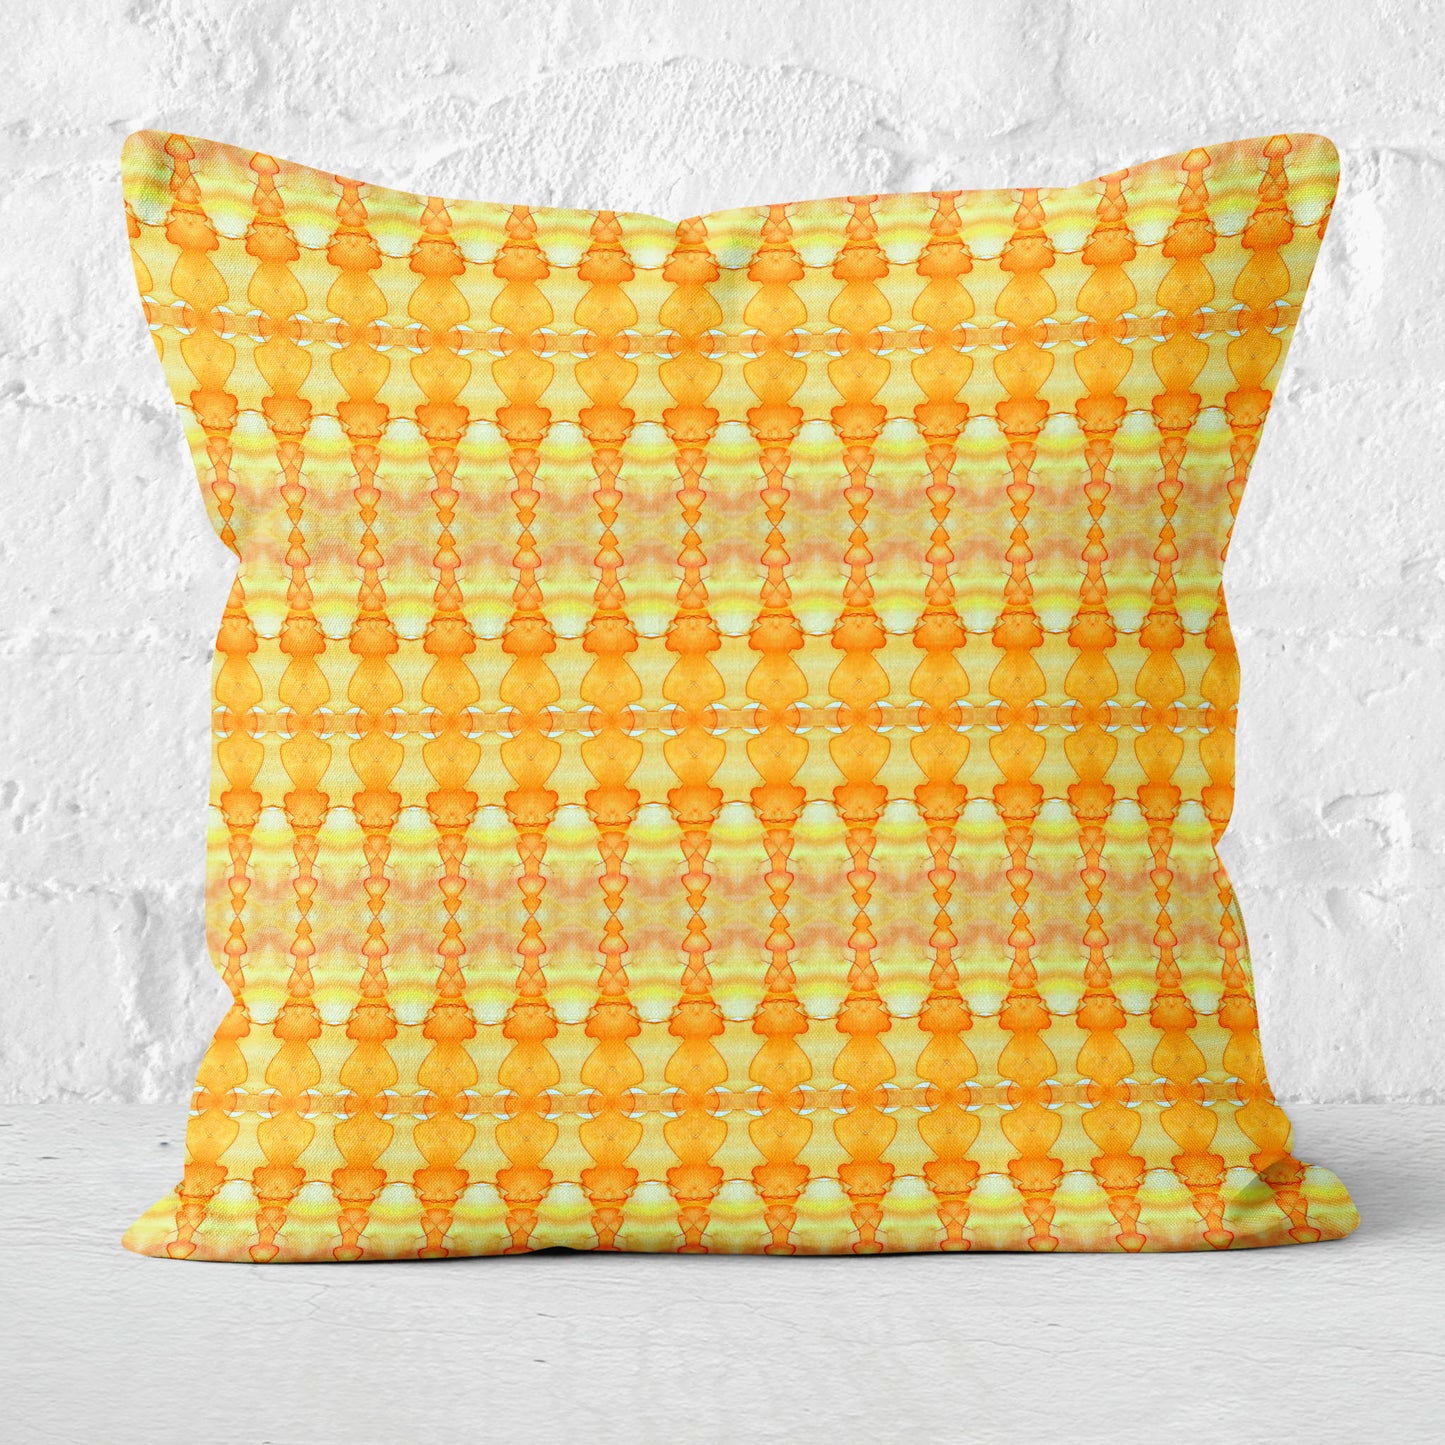 Square throw pillow featuring hand-painted pattern in yellow and orange with a white brick wall in the background